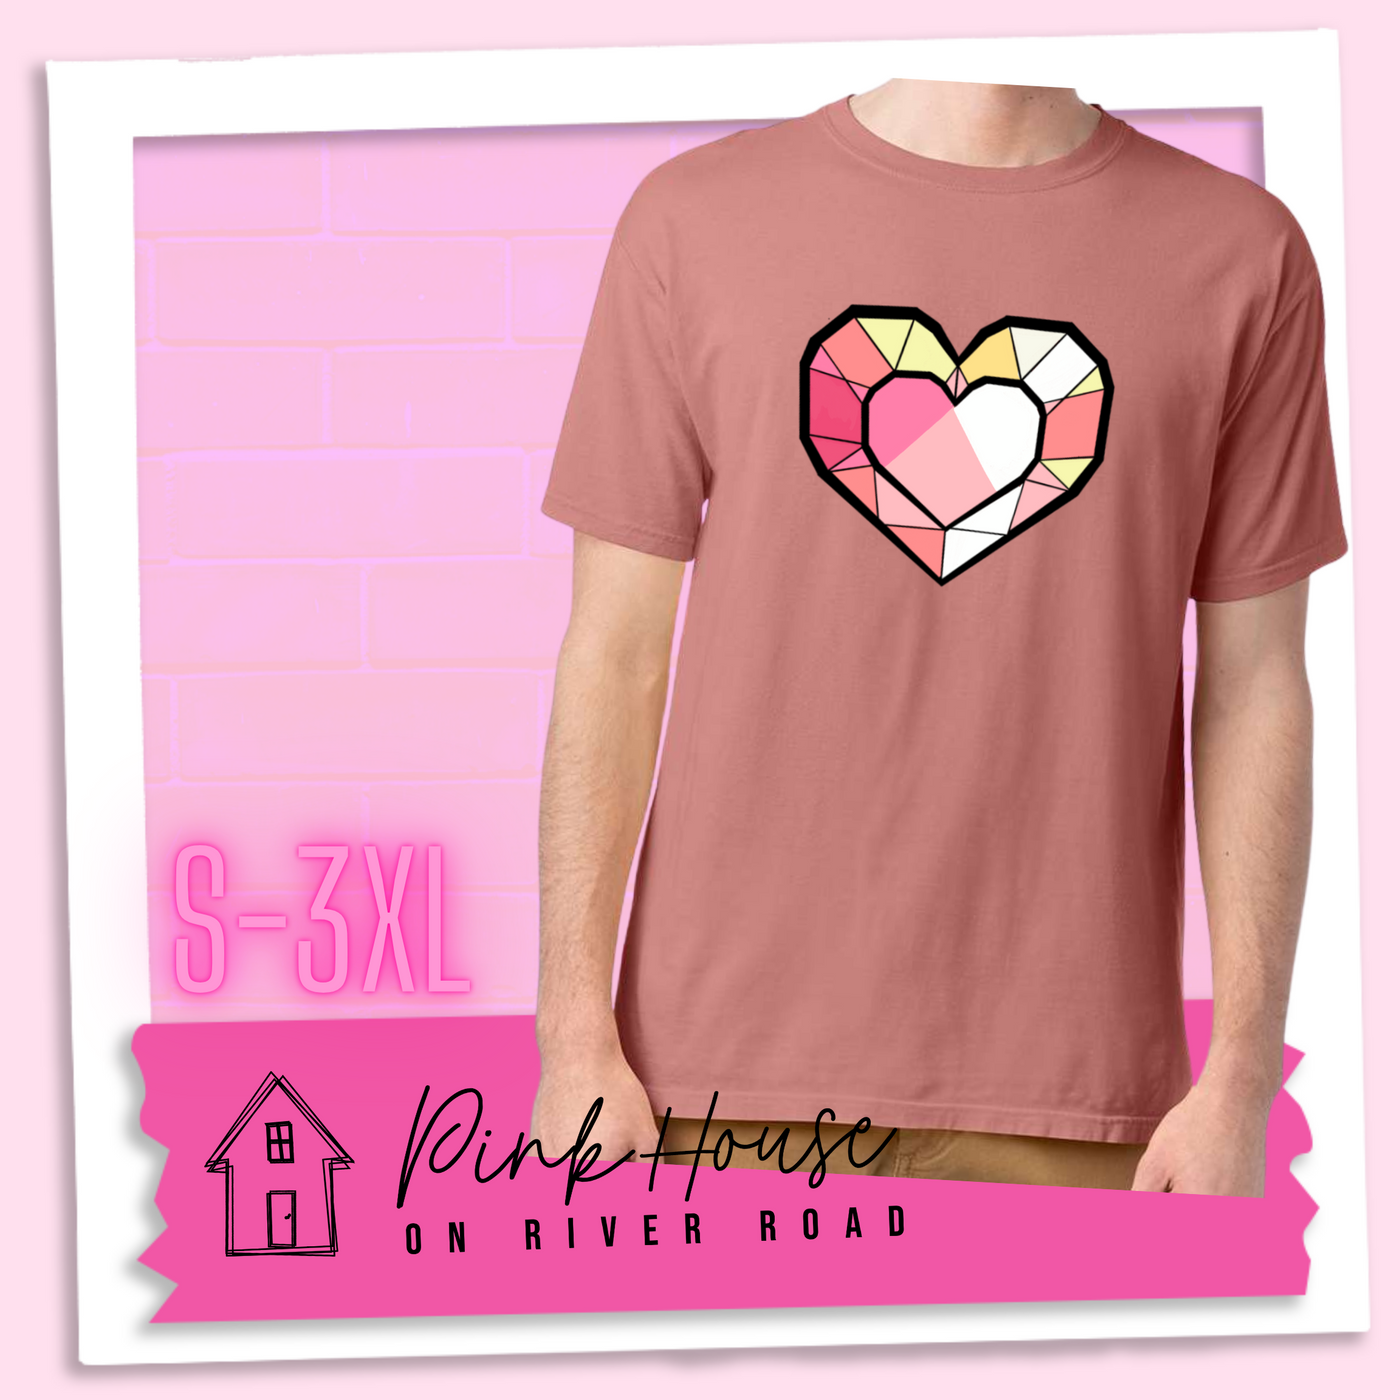 Mauve graphic tee. the graphic is of a geometric heart, it has black outlines to make it look like a gem with different shades of pinks, yellows, and white.